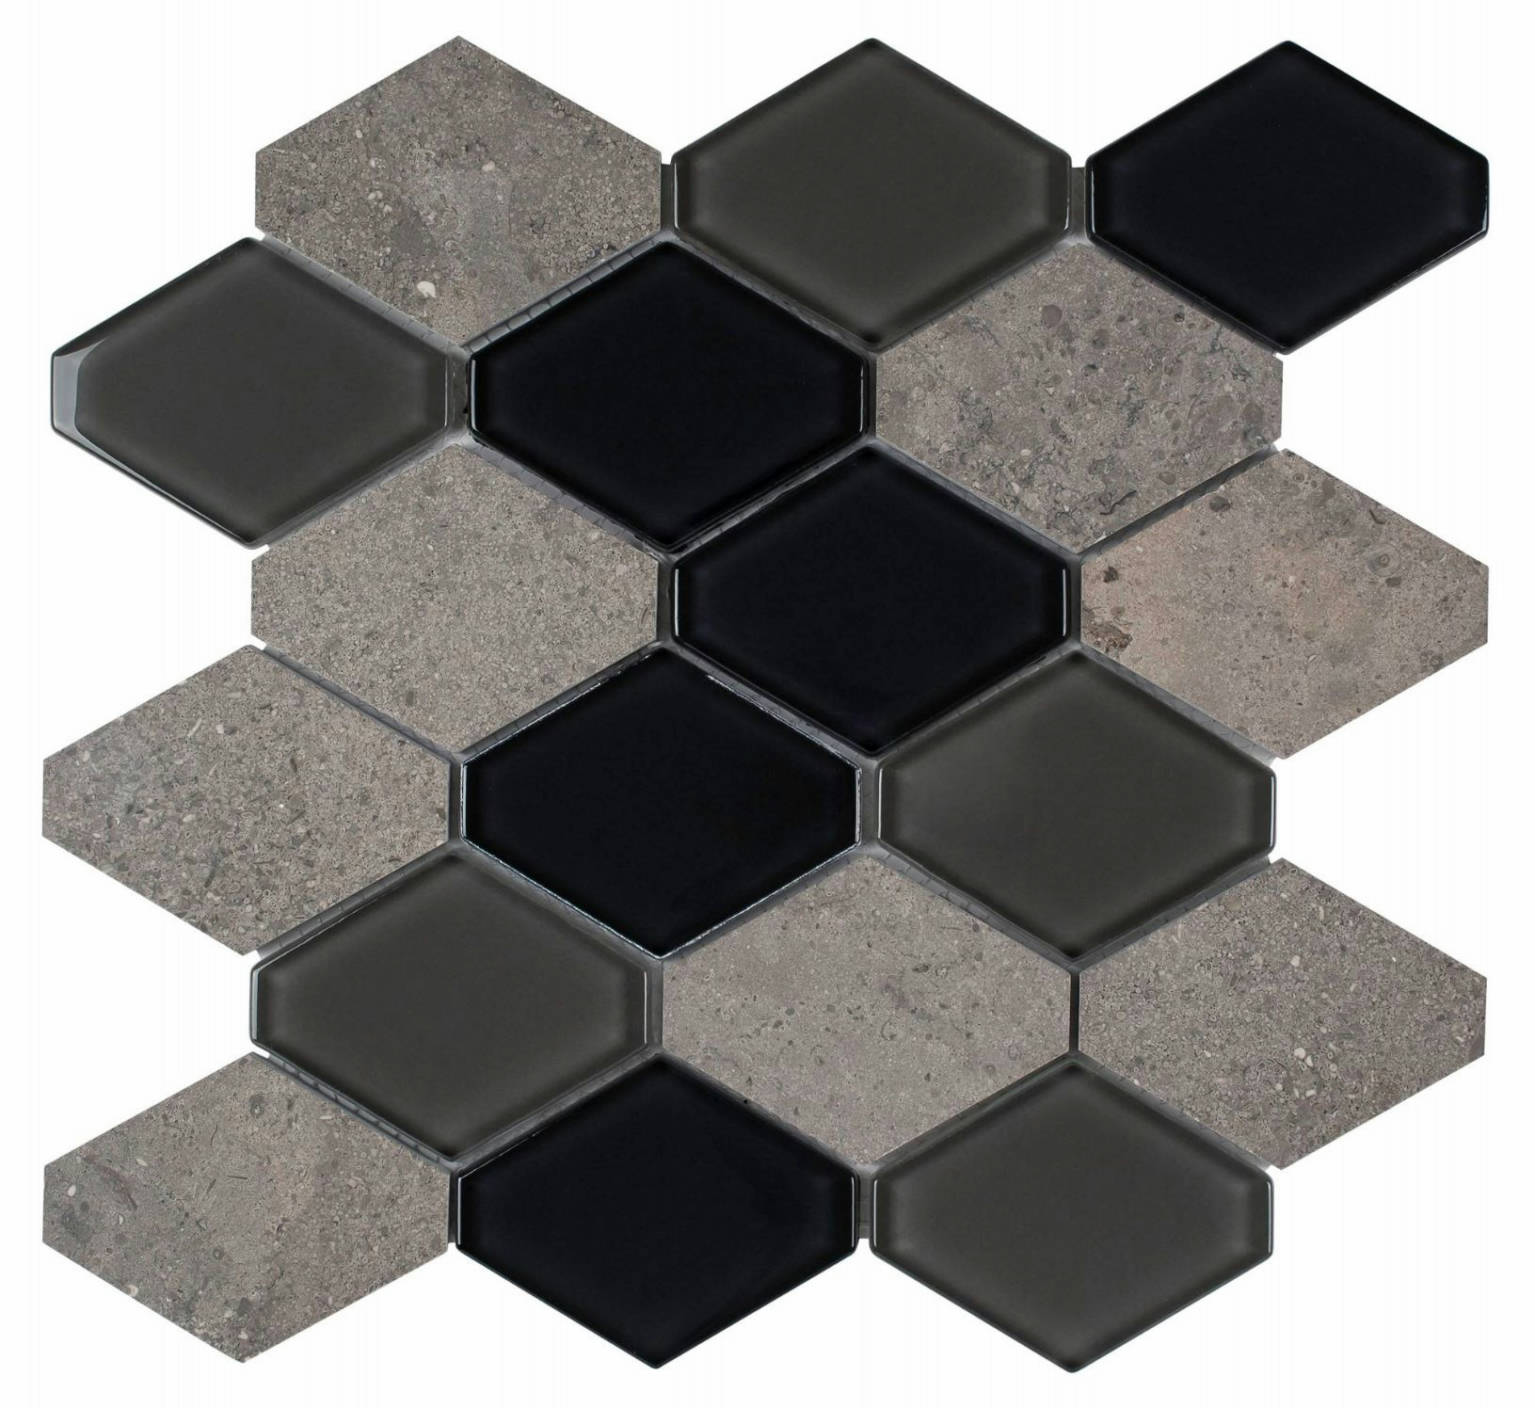 YS1537A | Stones & More | Finest selection of Mosaics, Glass, Tile and Stone